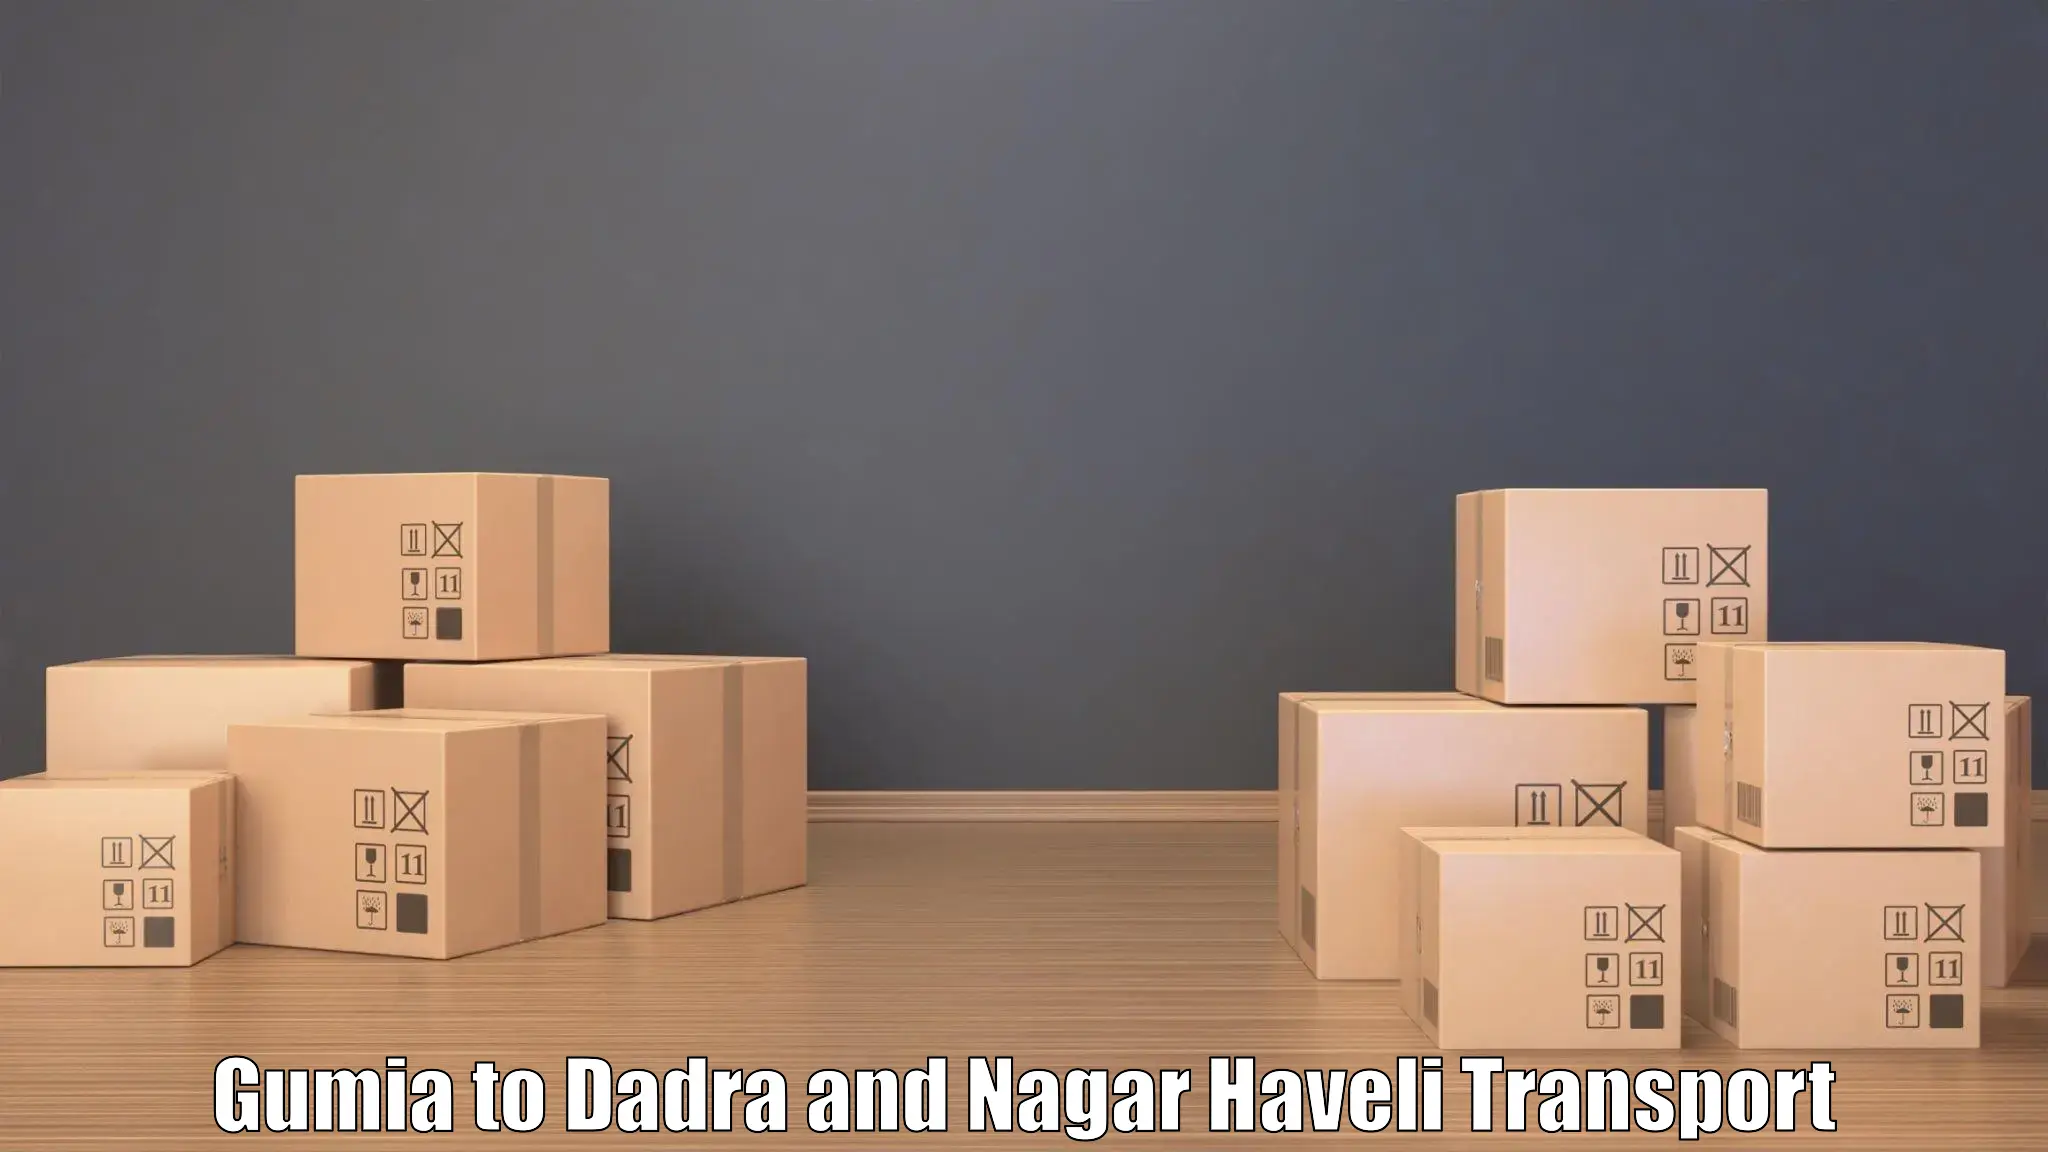 Commercial transport service Gumia to Dadra and Nagar Haveli